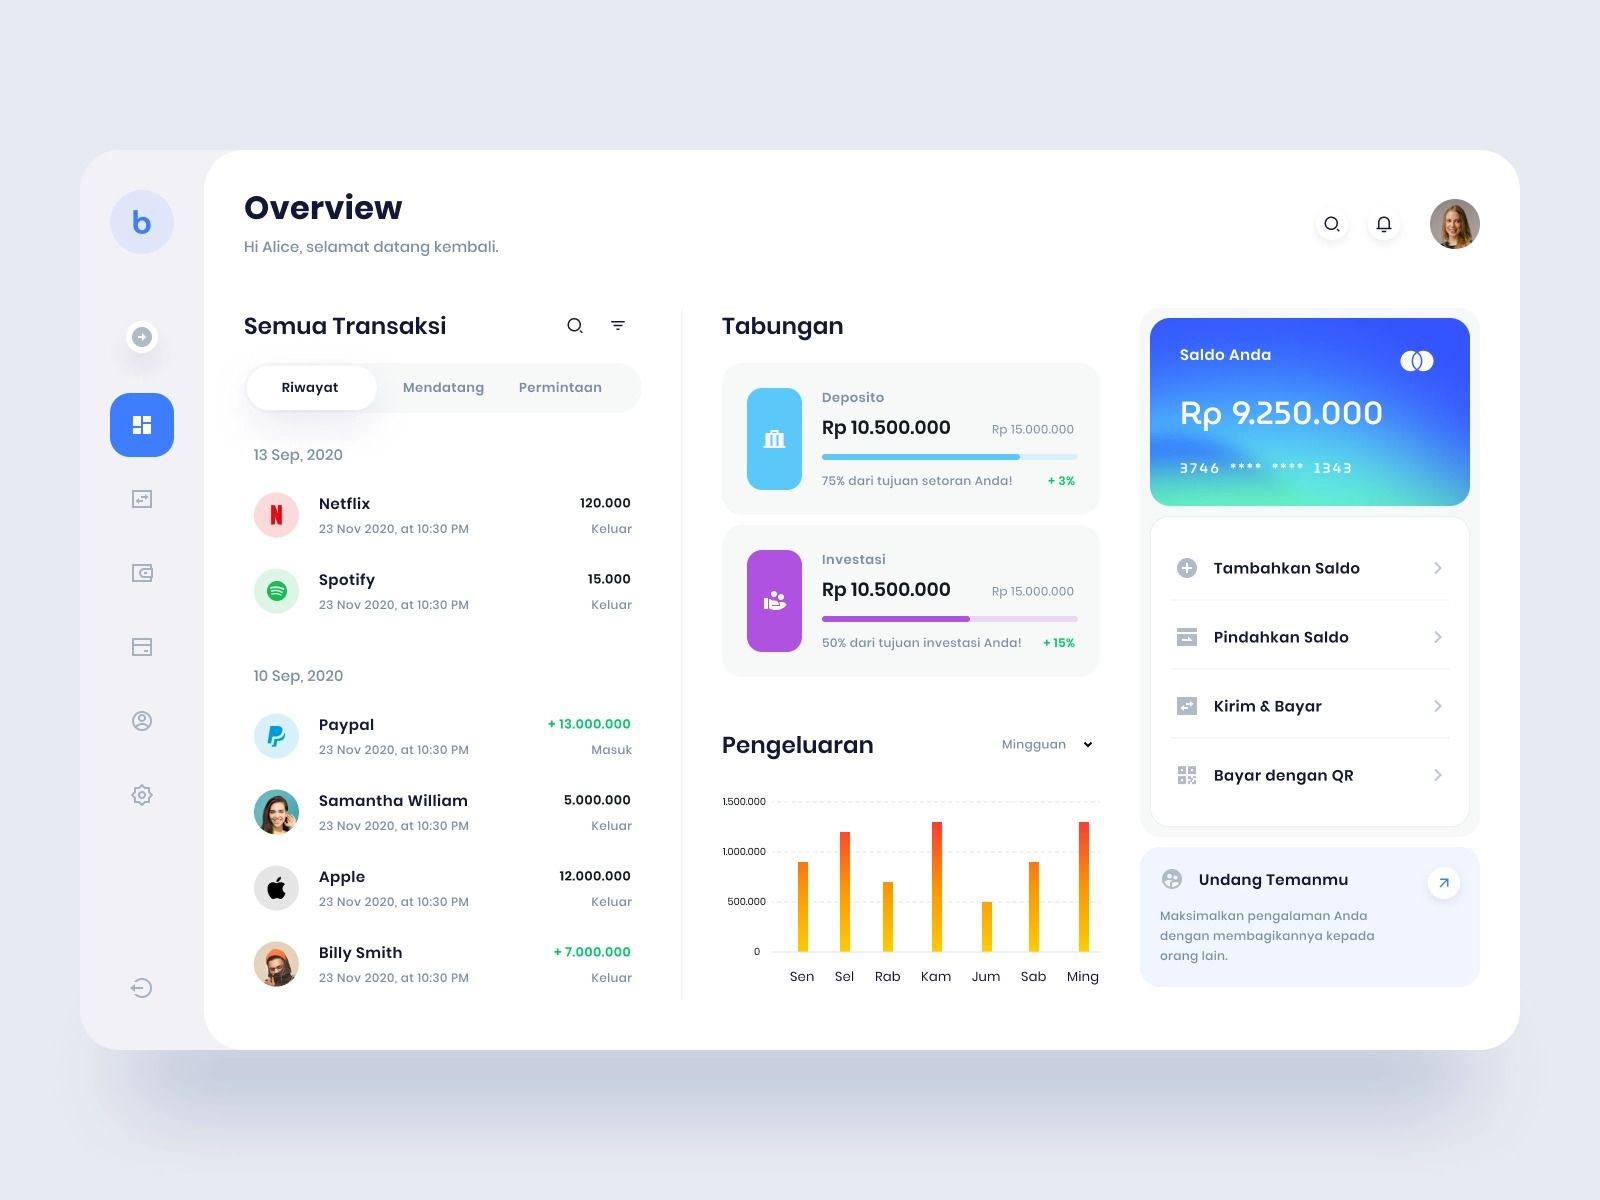 It’s reasonable to talk about features that you want in your app to your software developers and research the opportunities yourself (*image by [Johar](https://dribbble.com/joharwn){ rel="nofollow" target="_blank" .default-md}*)